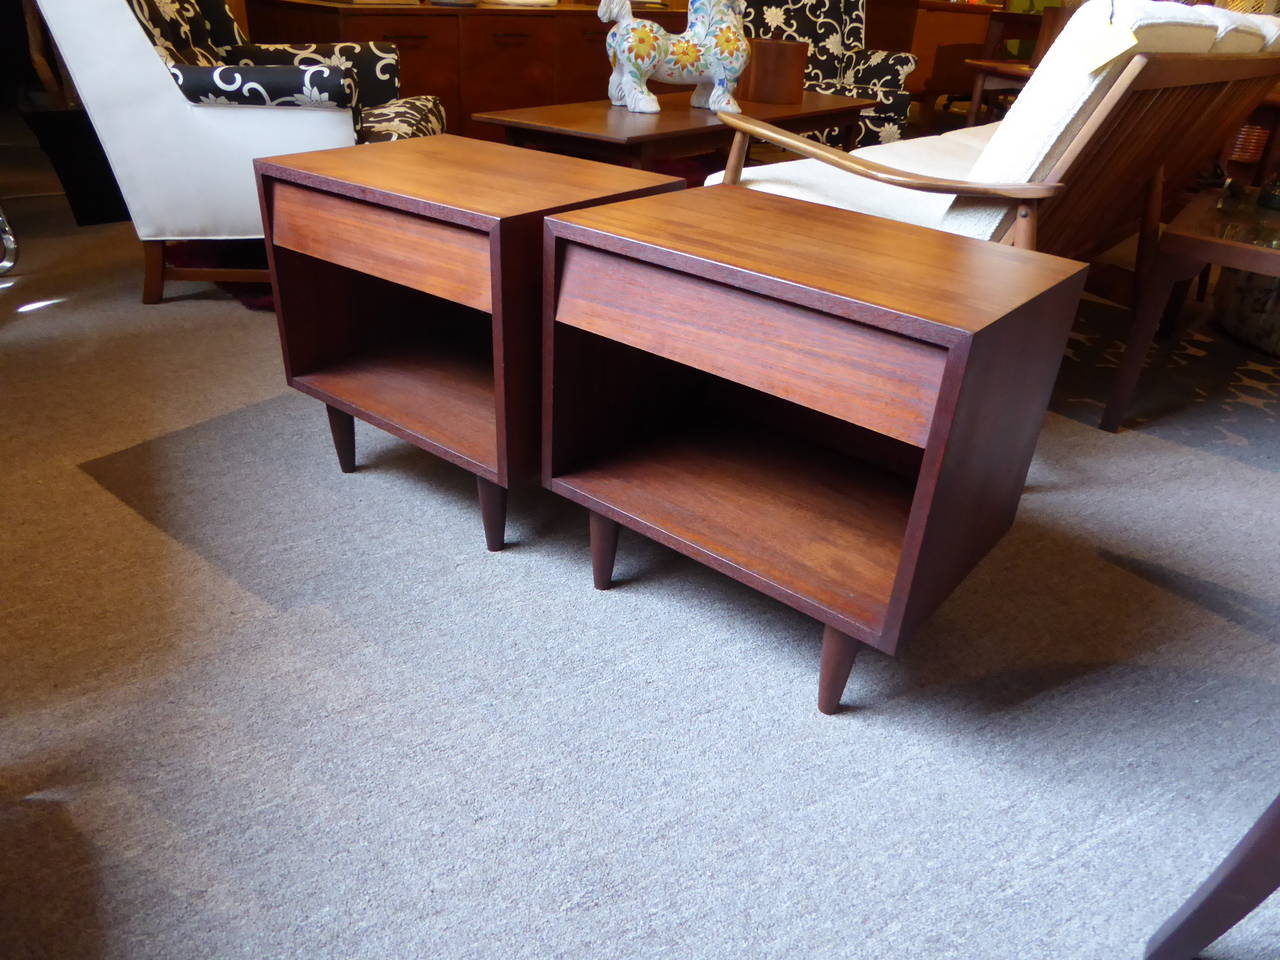 SOLD  Nice Minimalist Danish styling in this pair of warm and figured teak bedside tables, each with a single Knoll style slant front drawer over an open cabinet raised on tapered legs. In excellent condition with two small veneer repairs to the